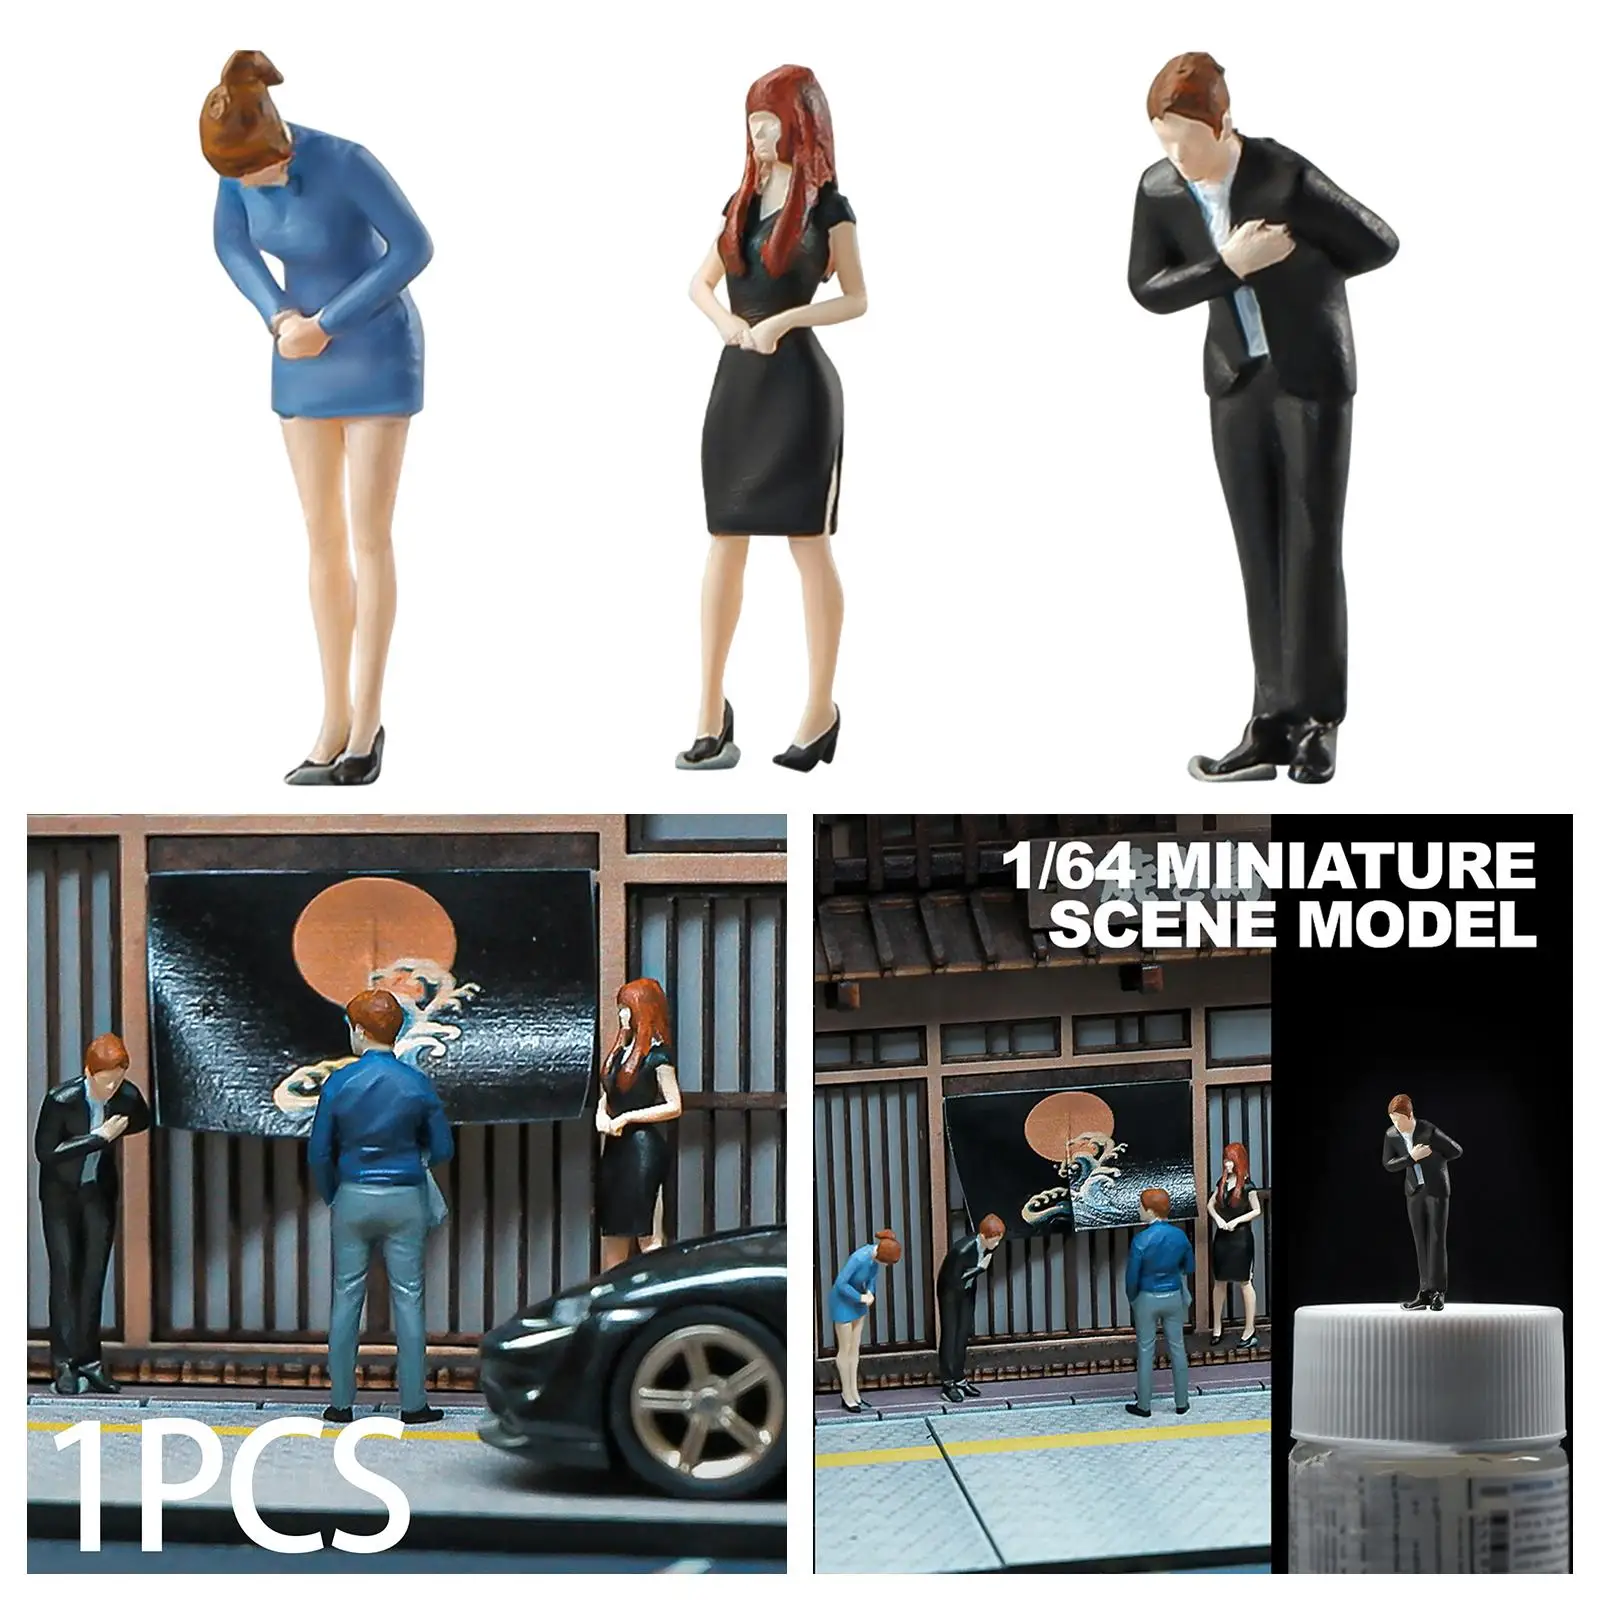 Miniature 1/64 Scale Dollhouse People for Architecture Model Train Railway DIY Projects Desktop Ornament Collections